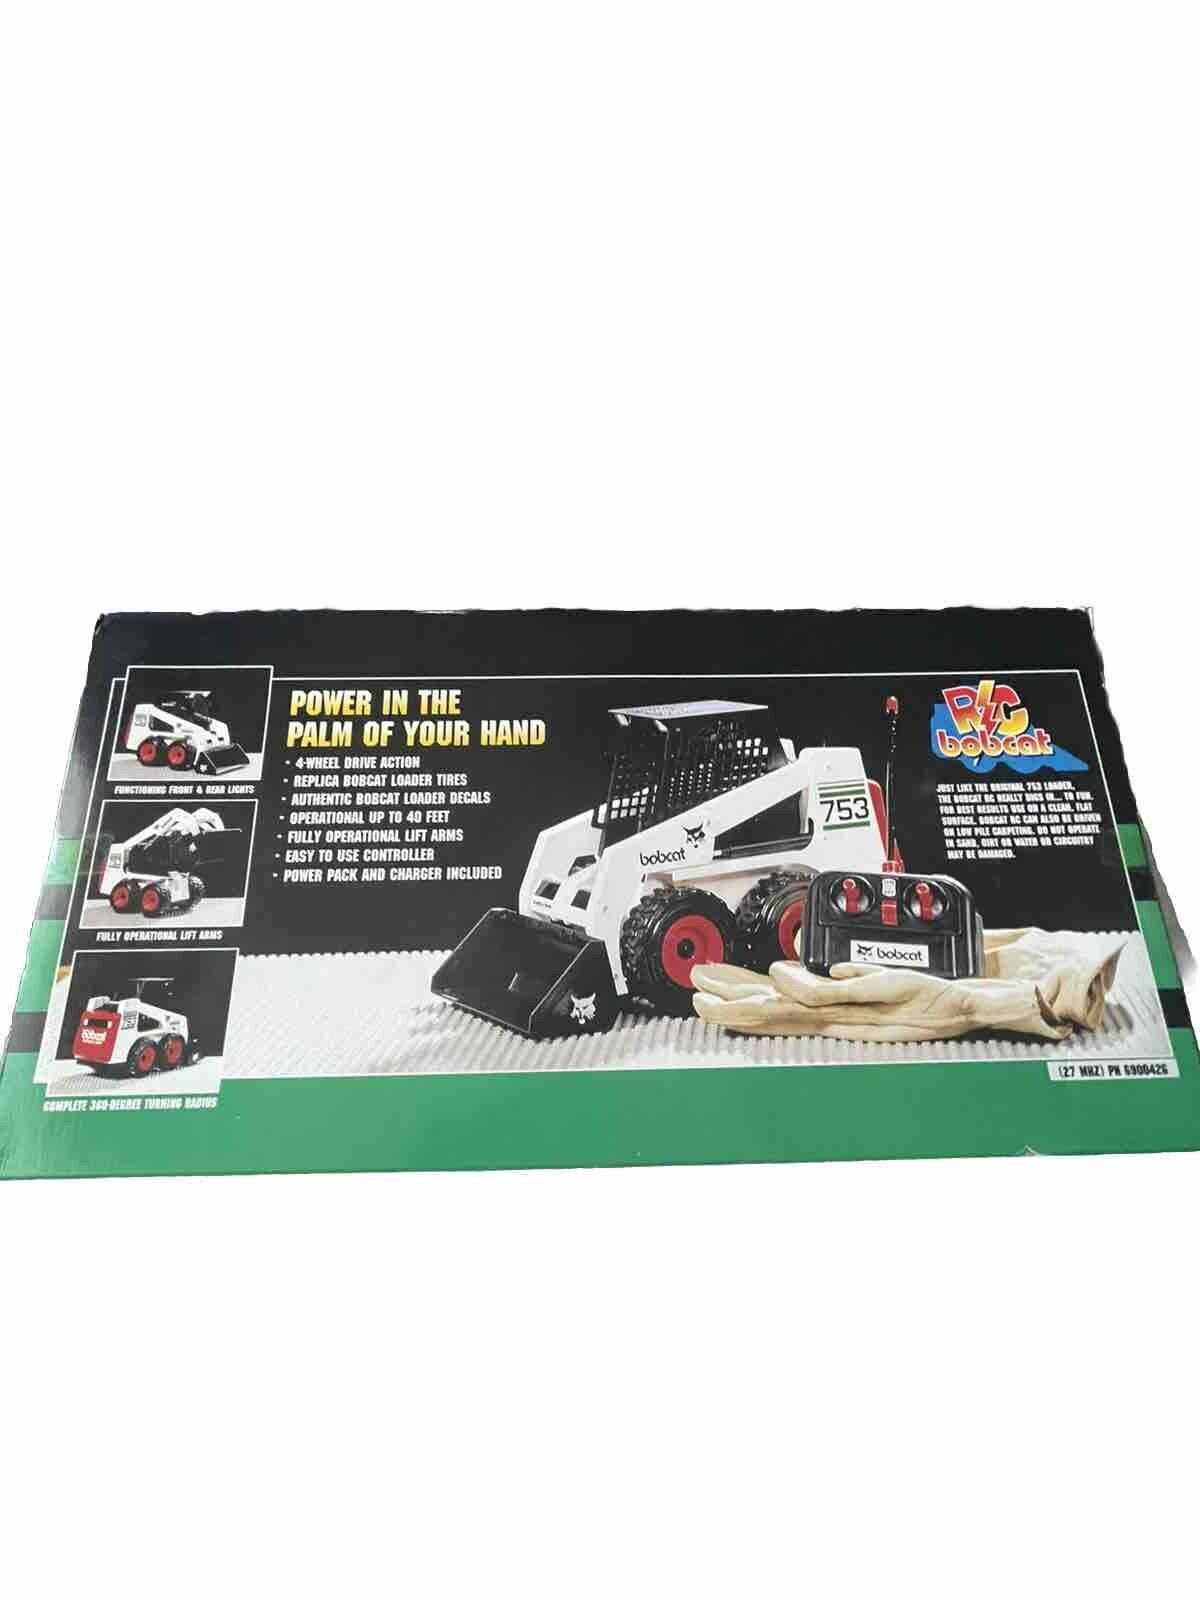 NEW 753 Bobcat Radio Controlled Skid Steer Loader In Box Echo Toys